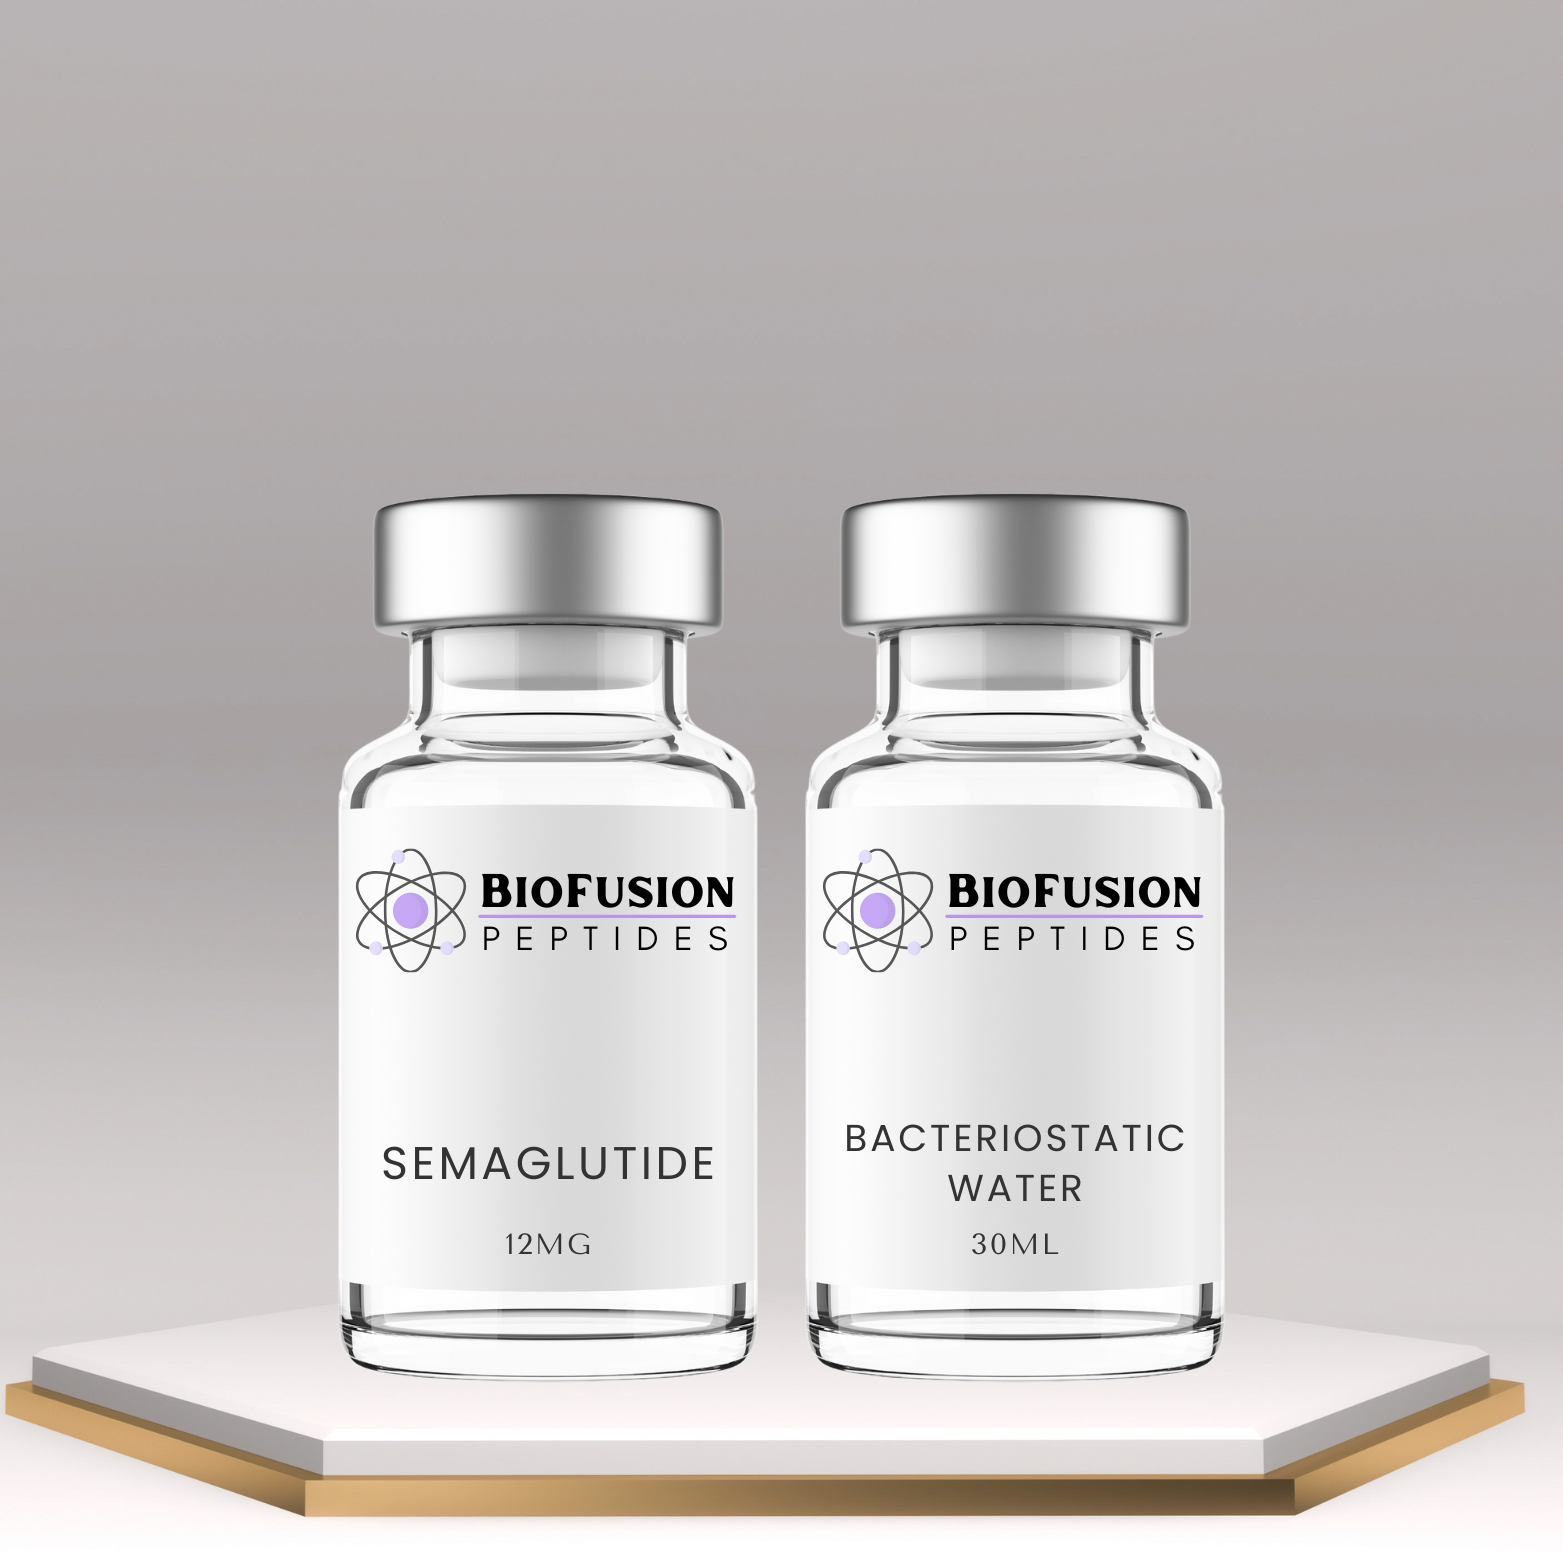 BioFusion Peptides Semaglutide 12MG kit with bacteriostatic water